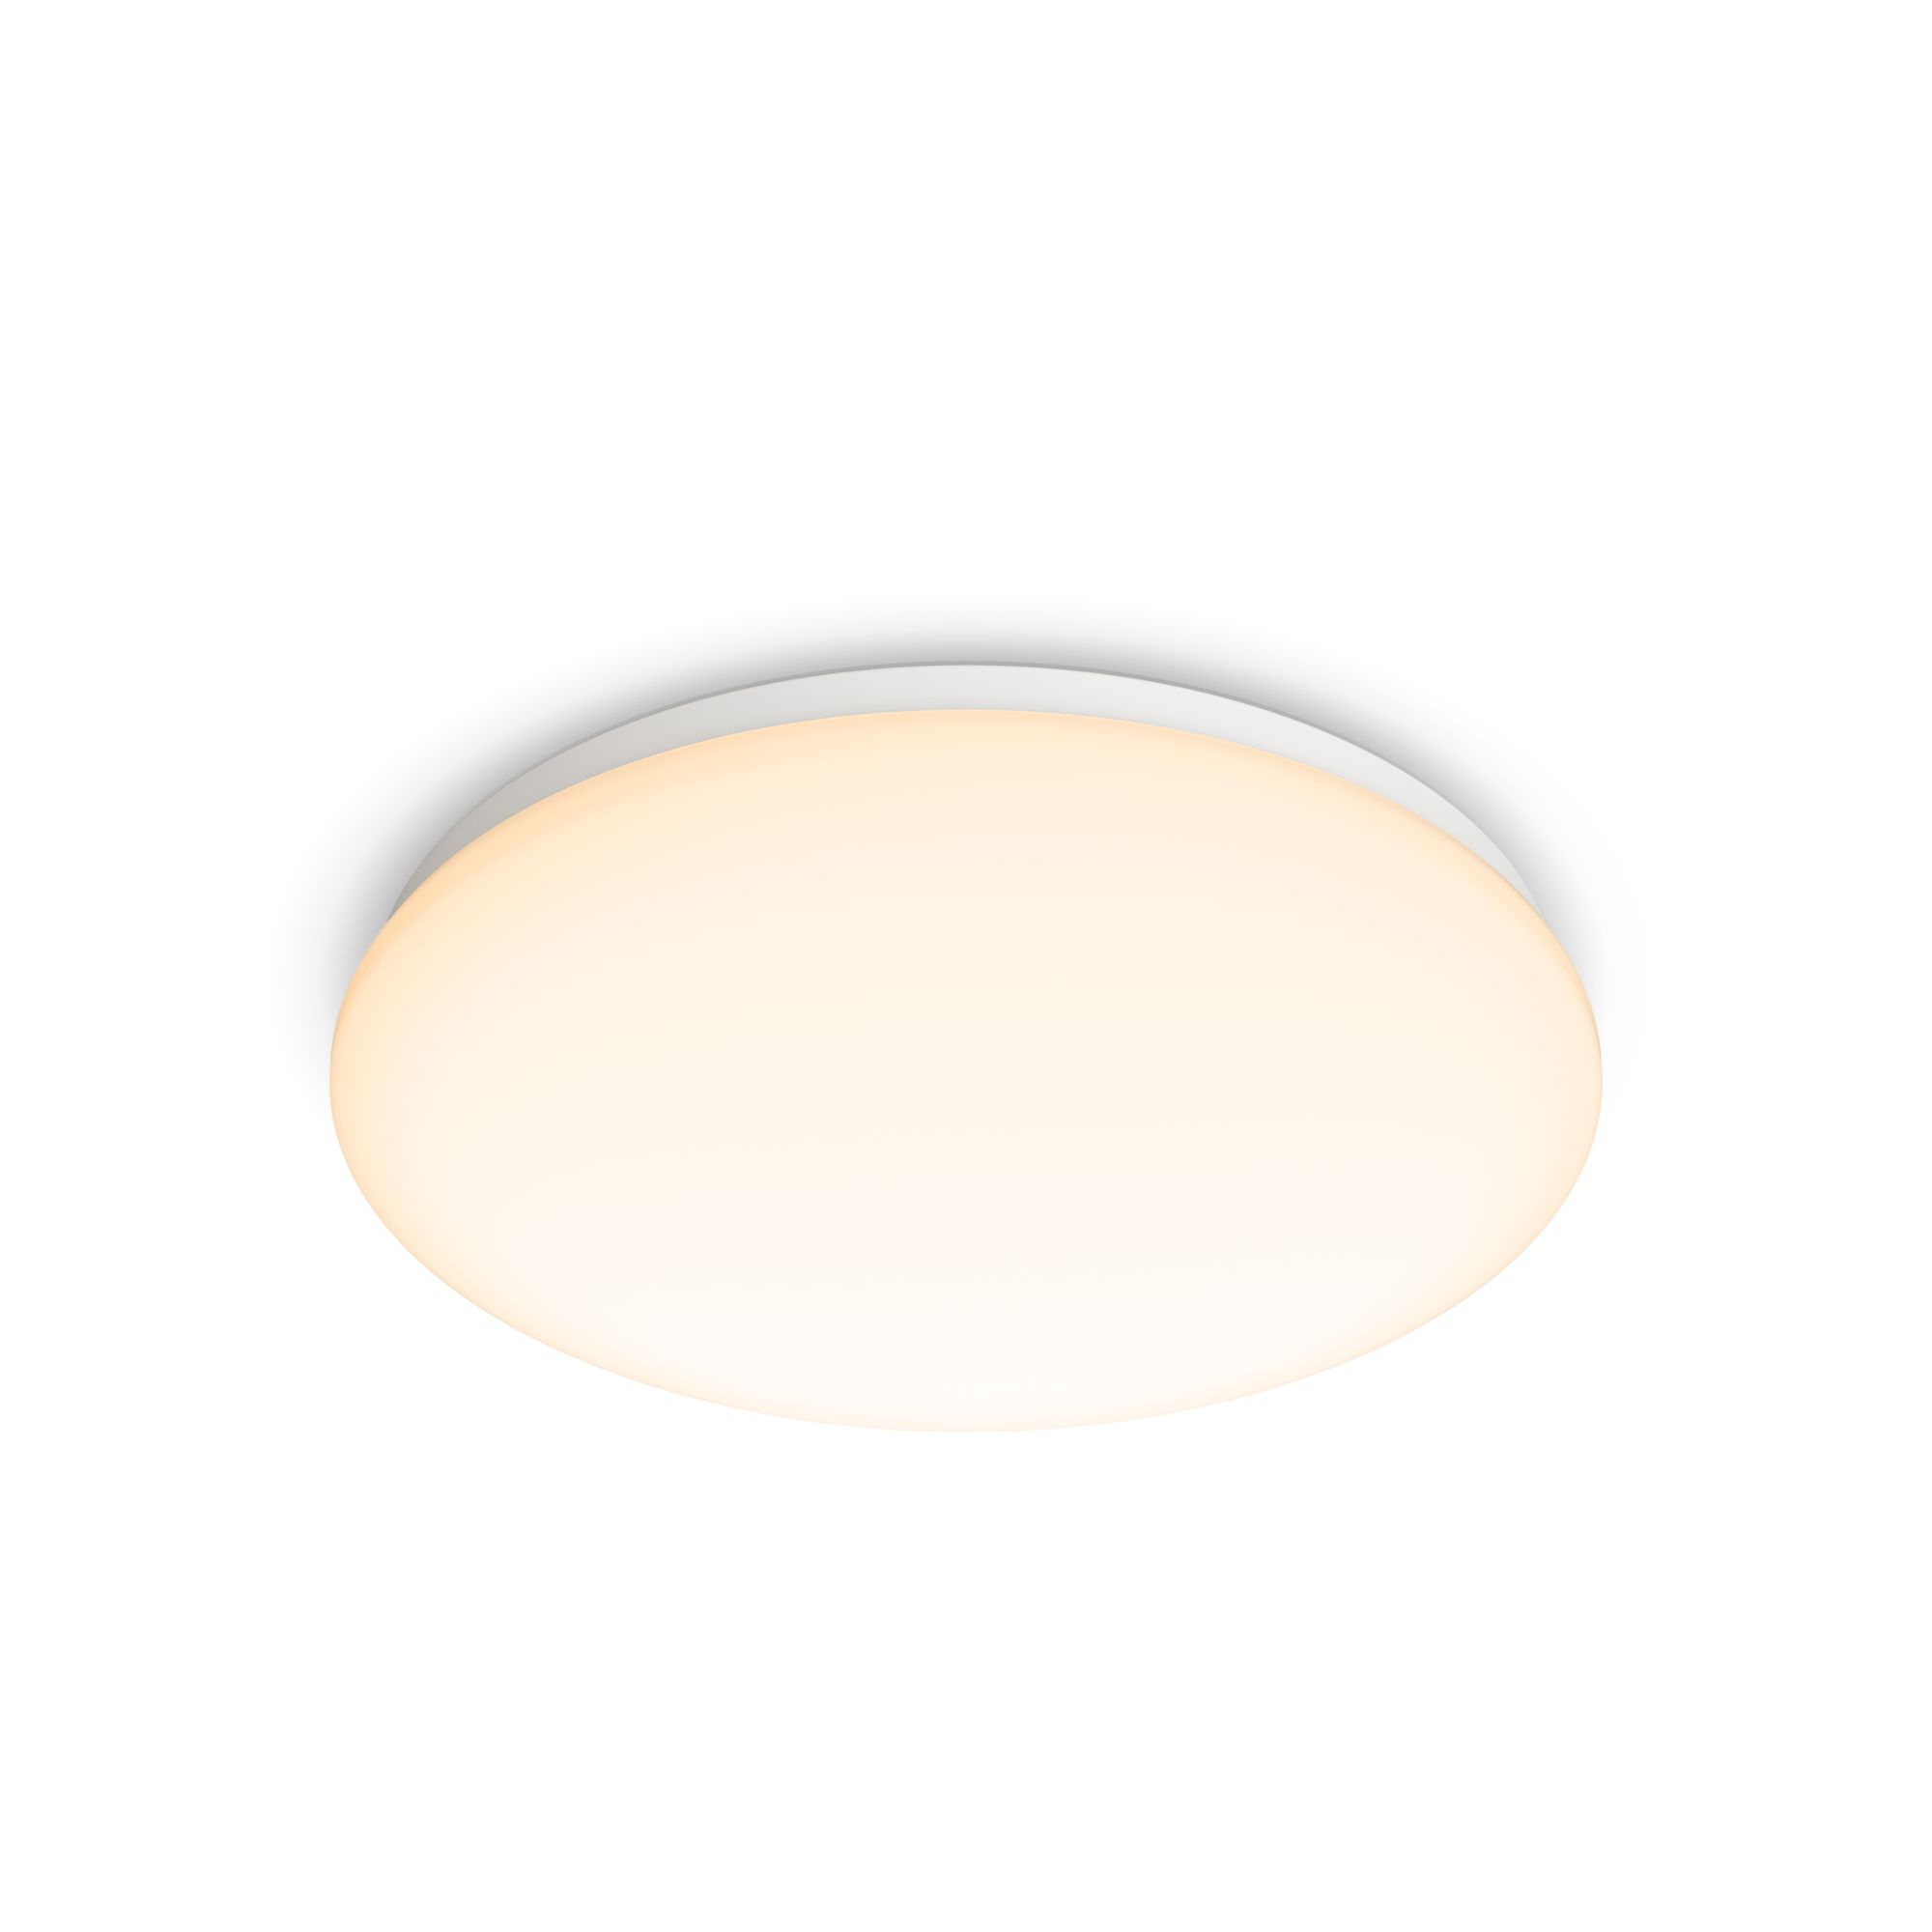 Philips by Signify Moire plafondverlichting, 17 W